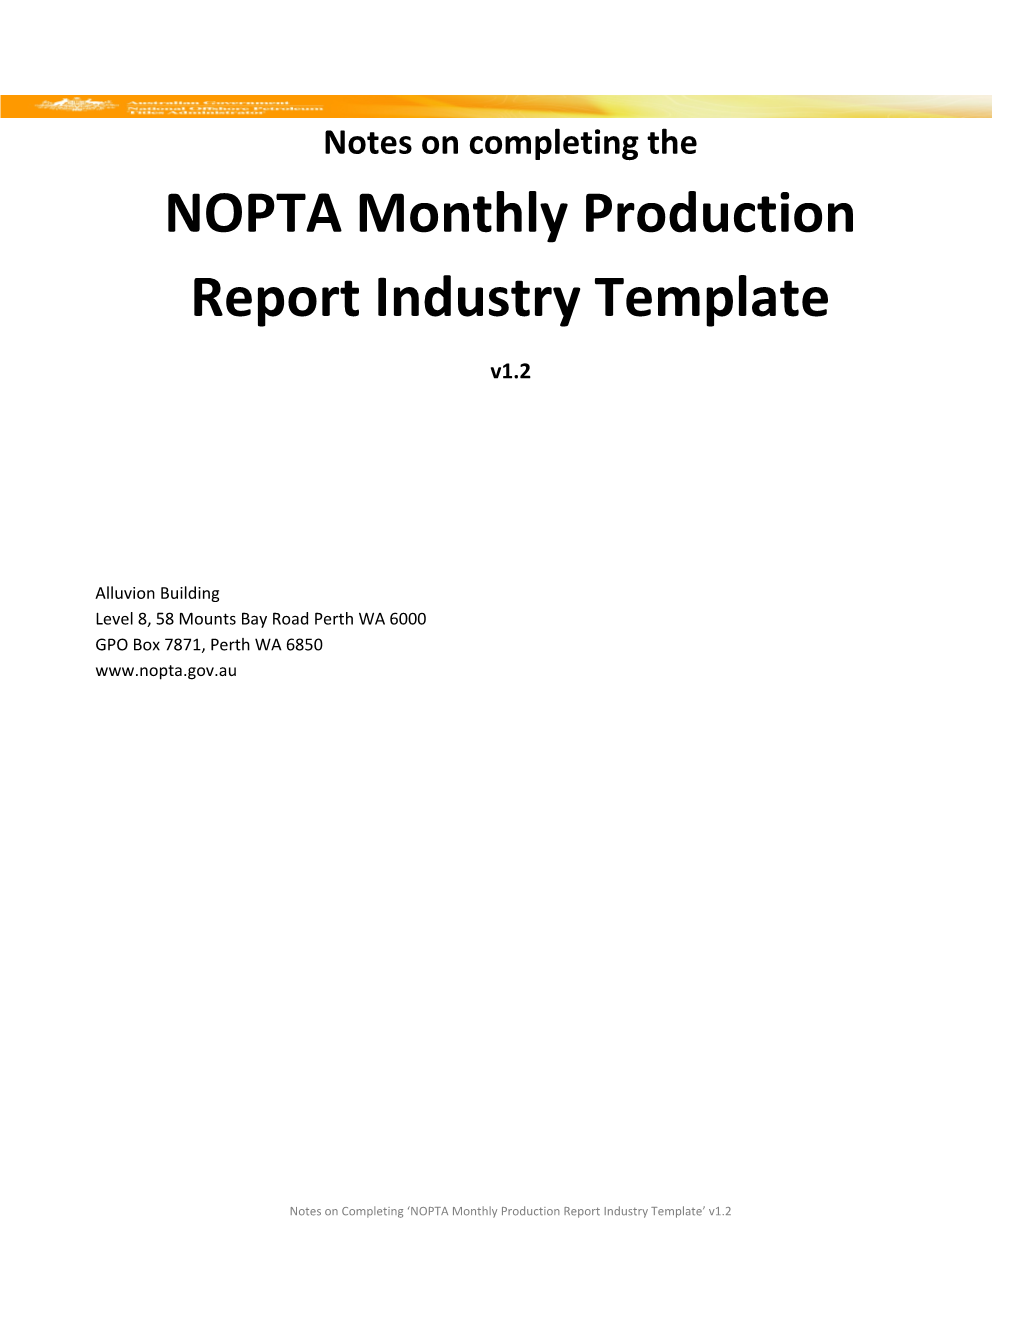 Notes on Completing the NOPTA Monthly Production Report Industry Template